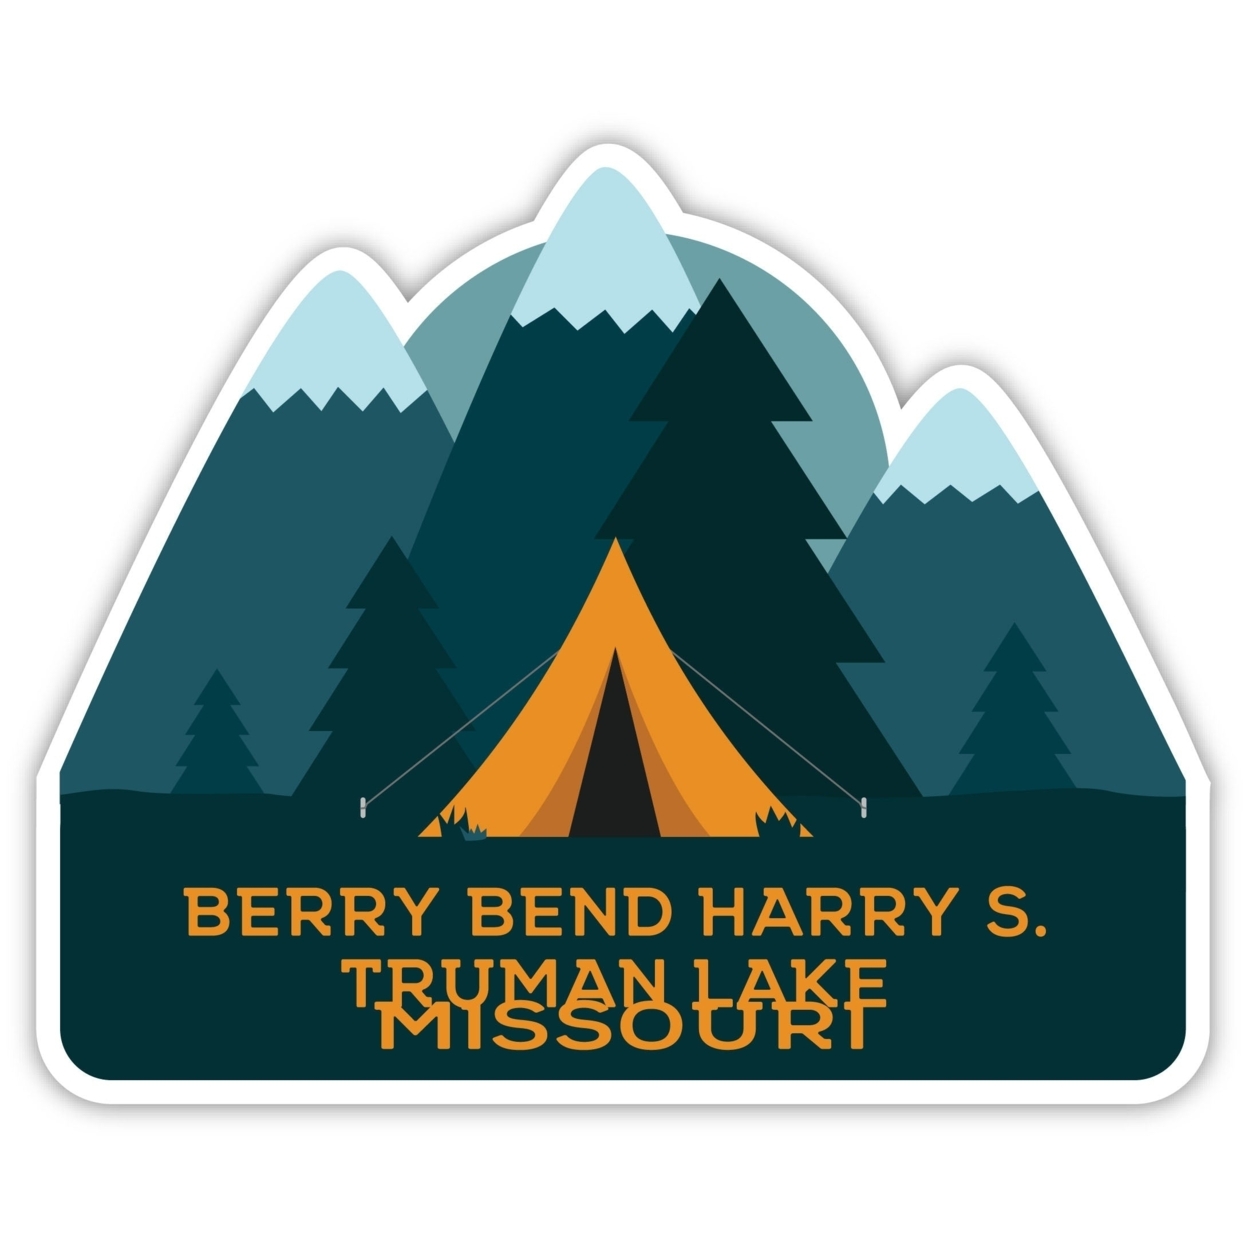 Berry Bend Harry S. Truman Lake Missouri Souvenir Decorative Stickers (Choose Theme And Size) - 4-Pack, 10-Inch, Tent